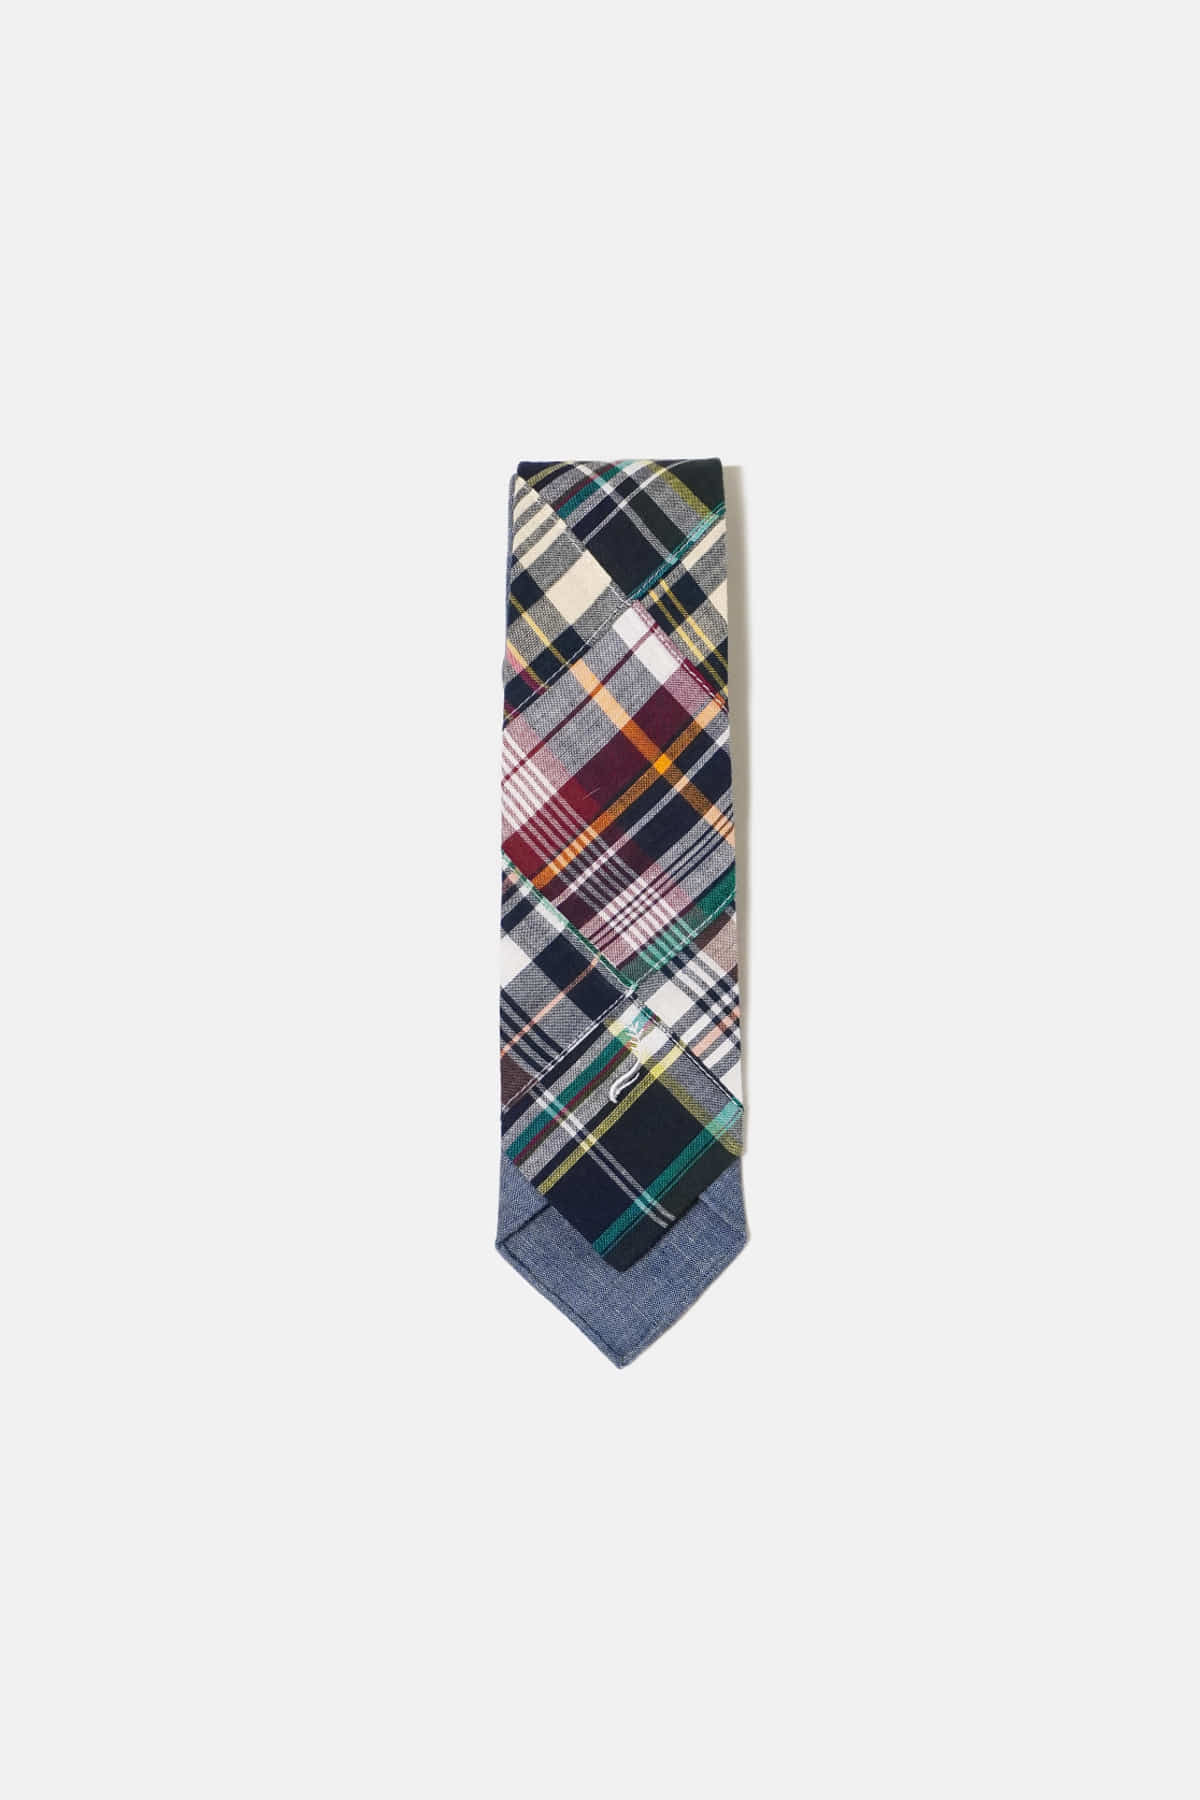 [KENNETH FIELD] 2 Face Tie - Patch Madras Navy